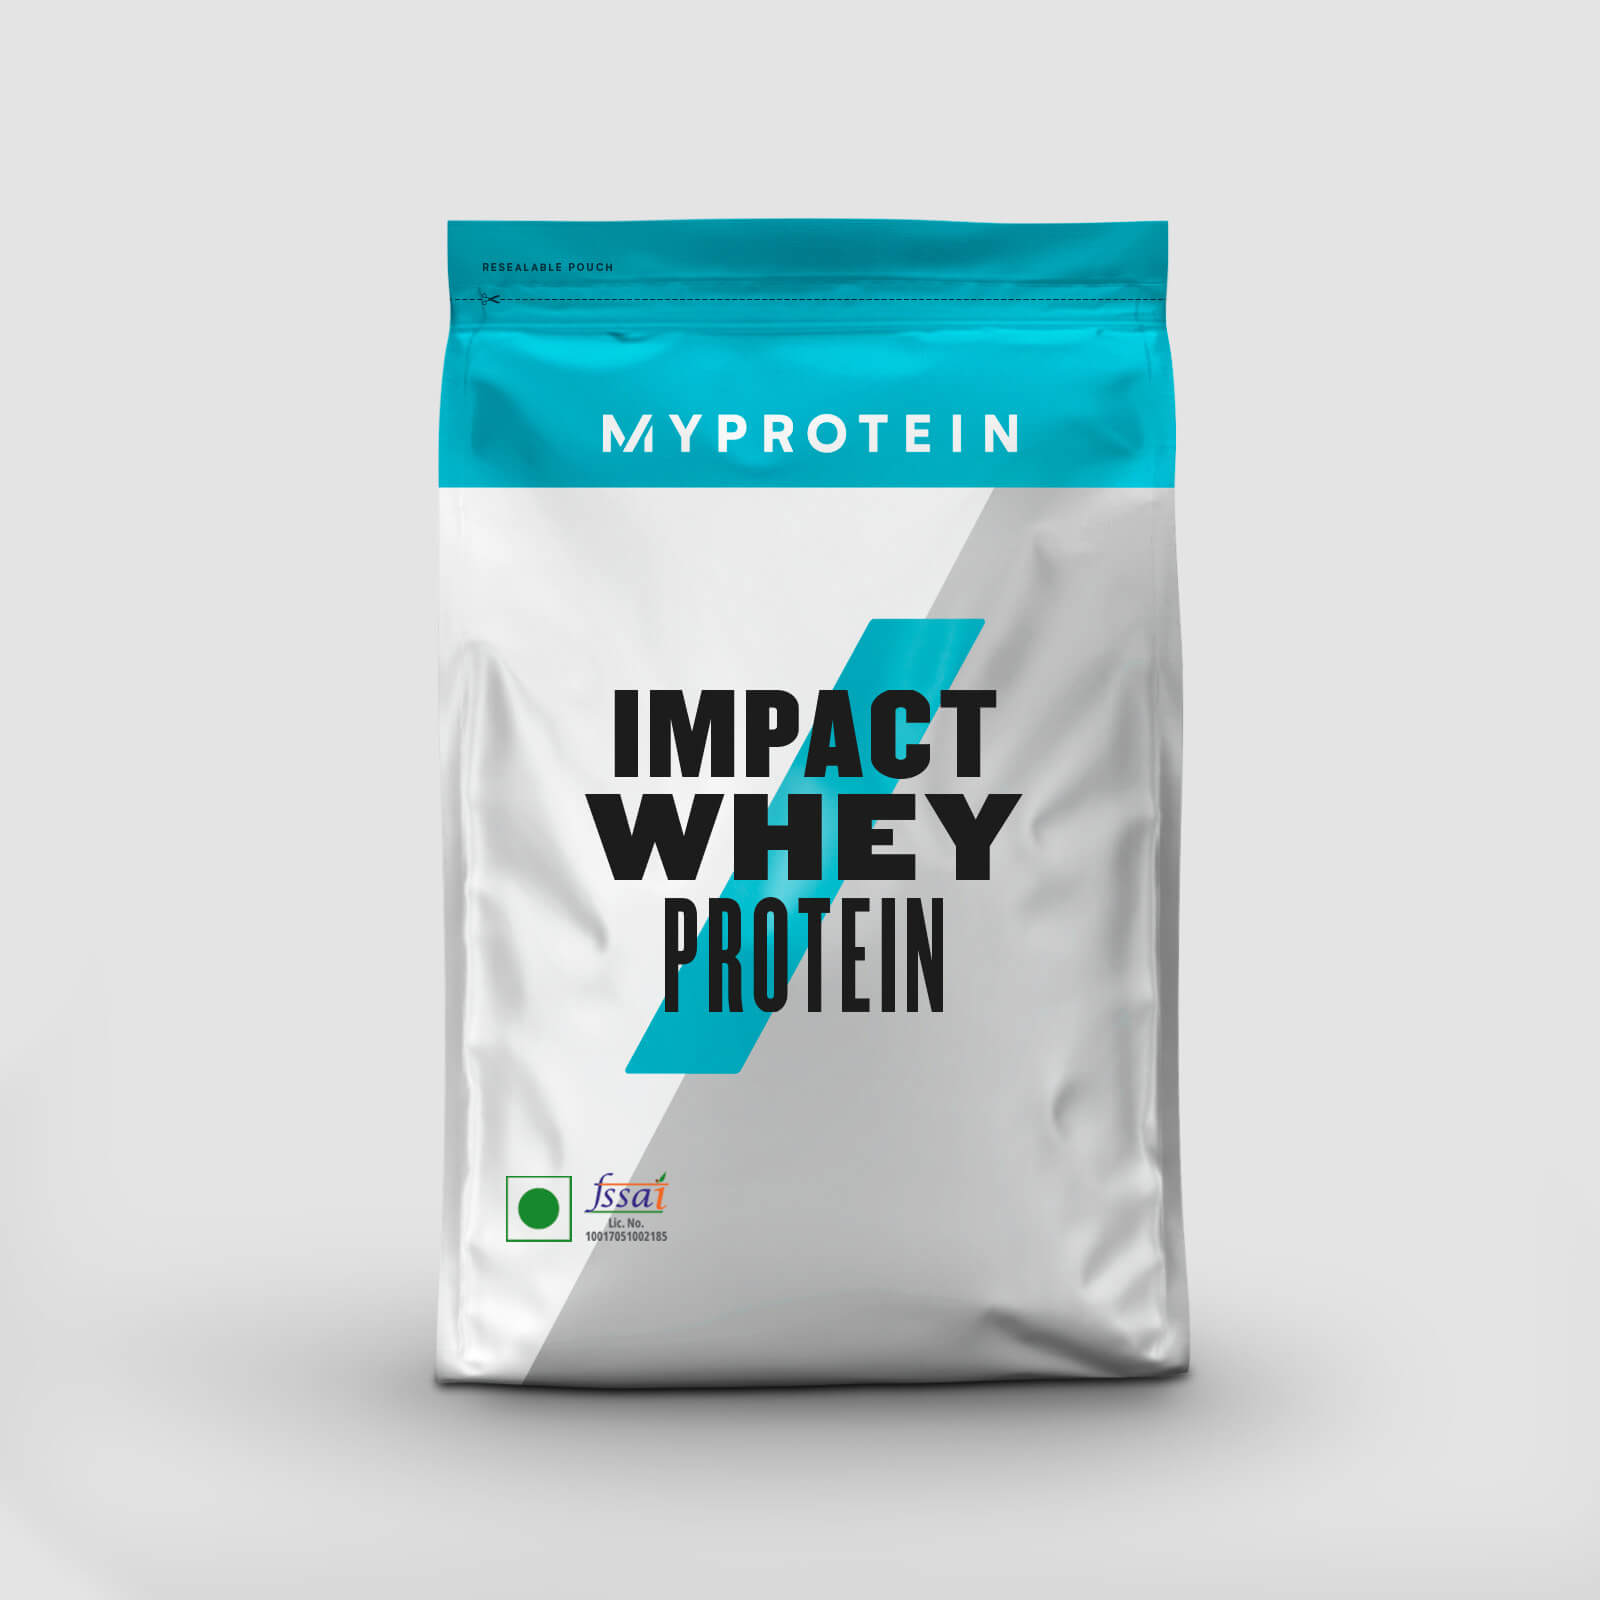 Impact Whey Protein - 250g - Frosted Cereal Milk